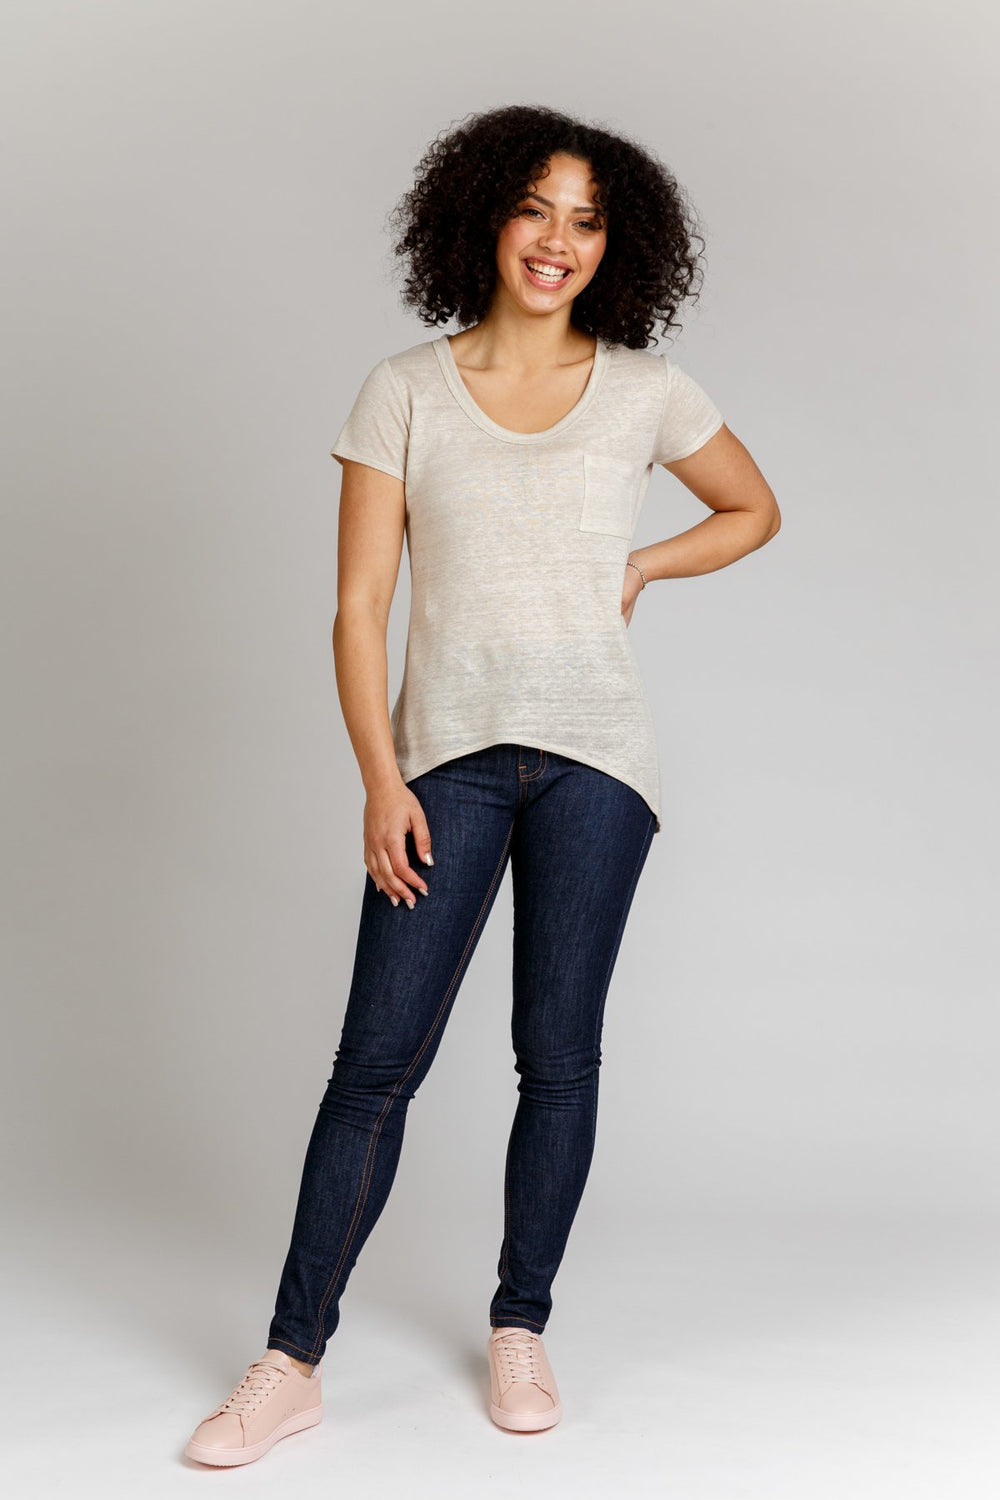 Woman wearing the Briar T-shirt sewing pattern from Megan Nielsen on The Fold Line. A Tee pattern made in jersey fabrics, sweater knits and stable knit fabrics, featuring a high scooped front hem, low curved back hem, short sleeves, chest patch pocket, an